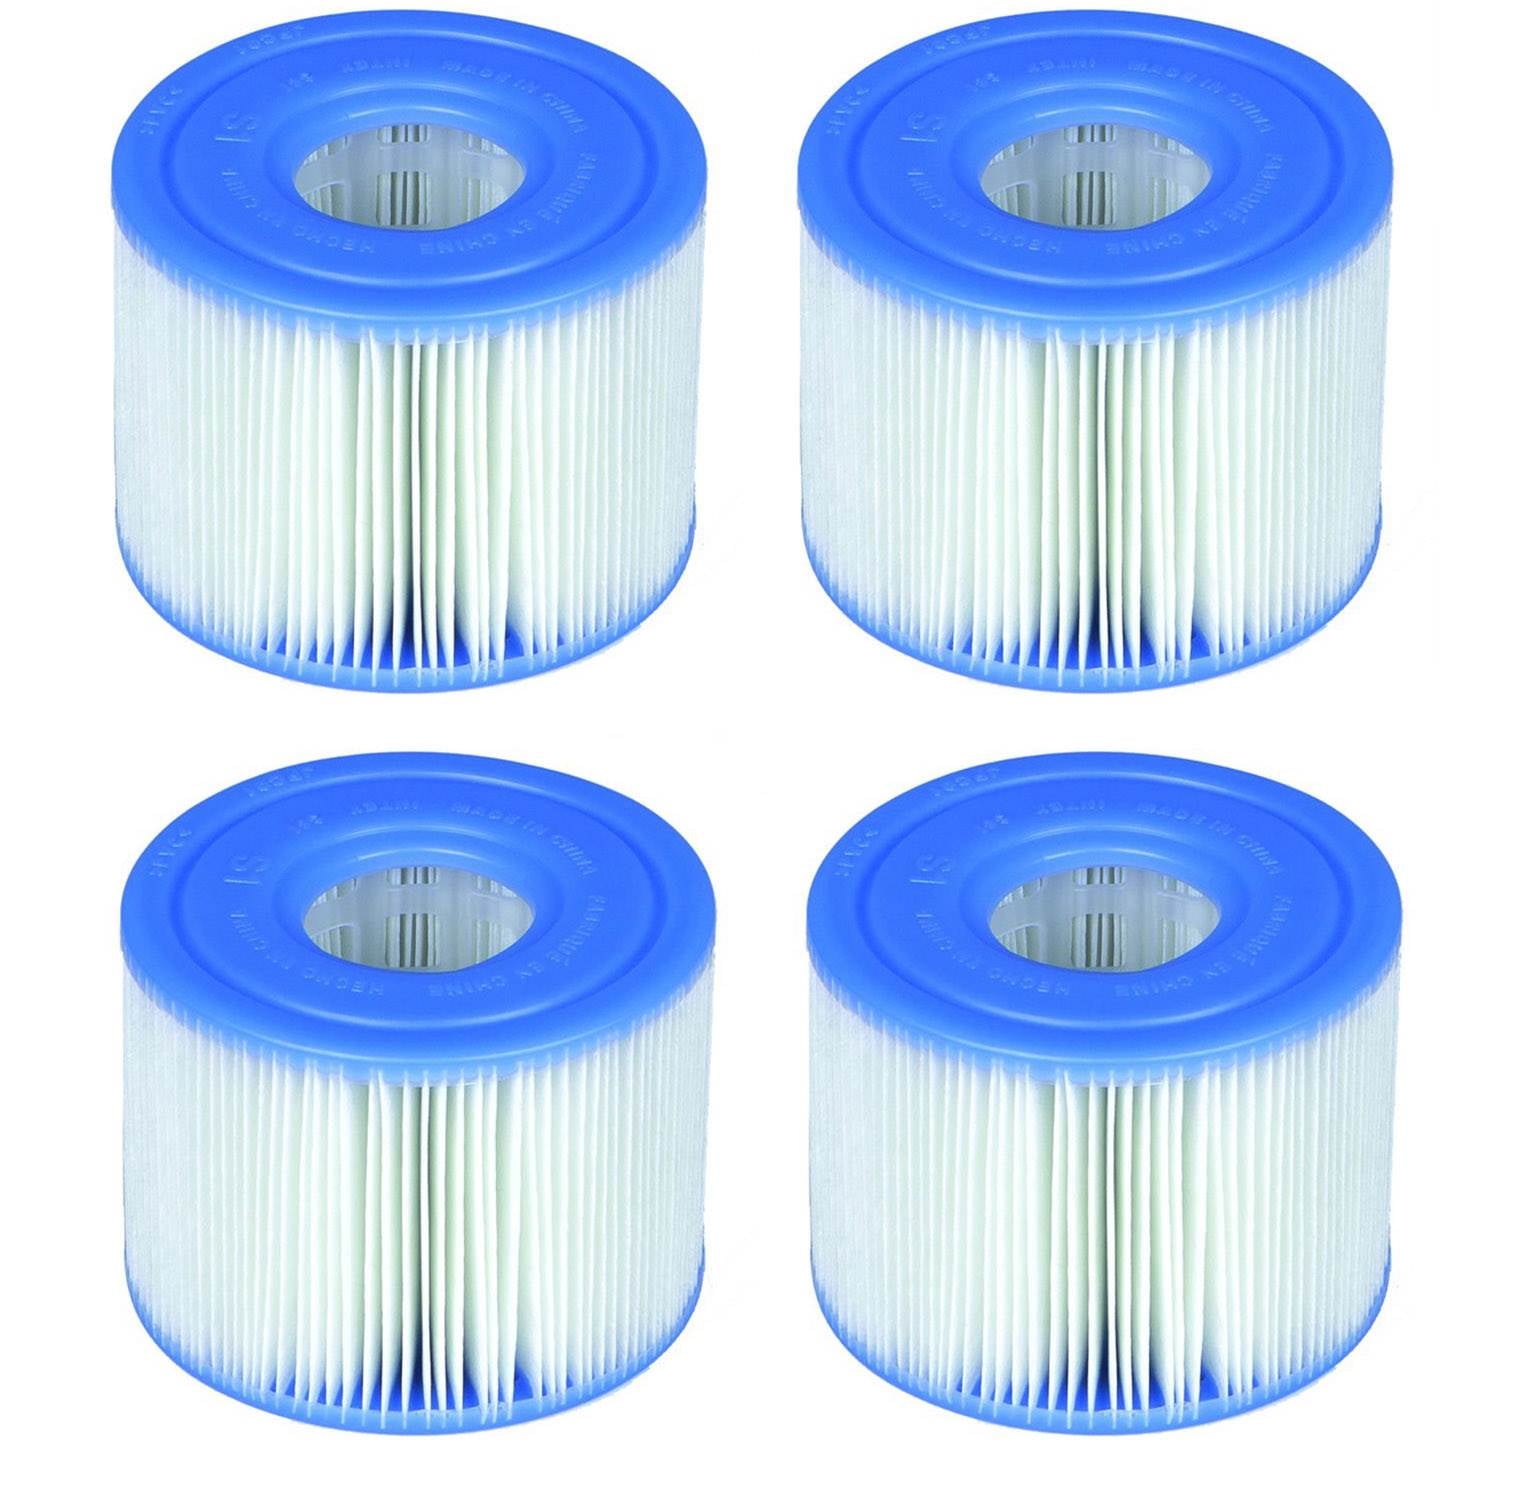 4 Filters Intex 29001E PureSpa Type S1 Easy Set Pool Filter Cartridges